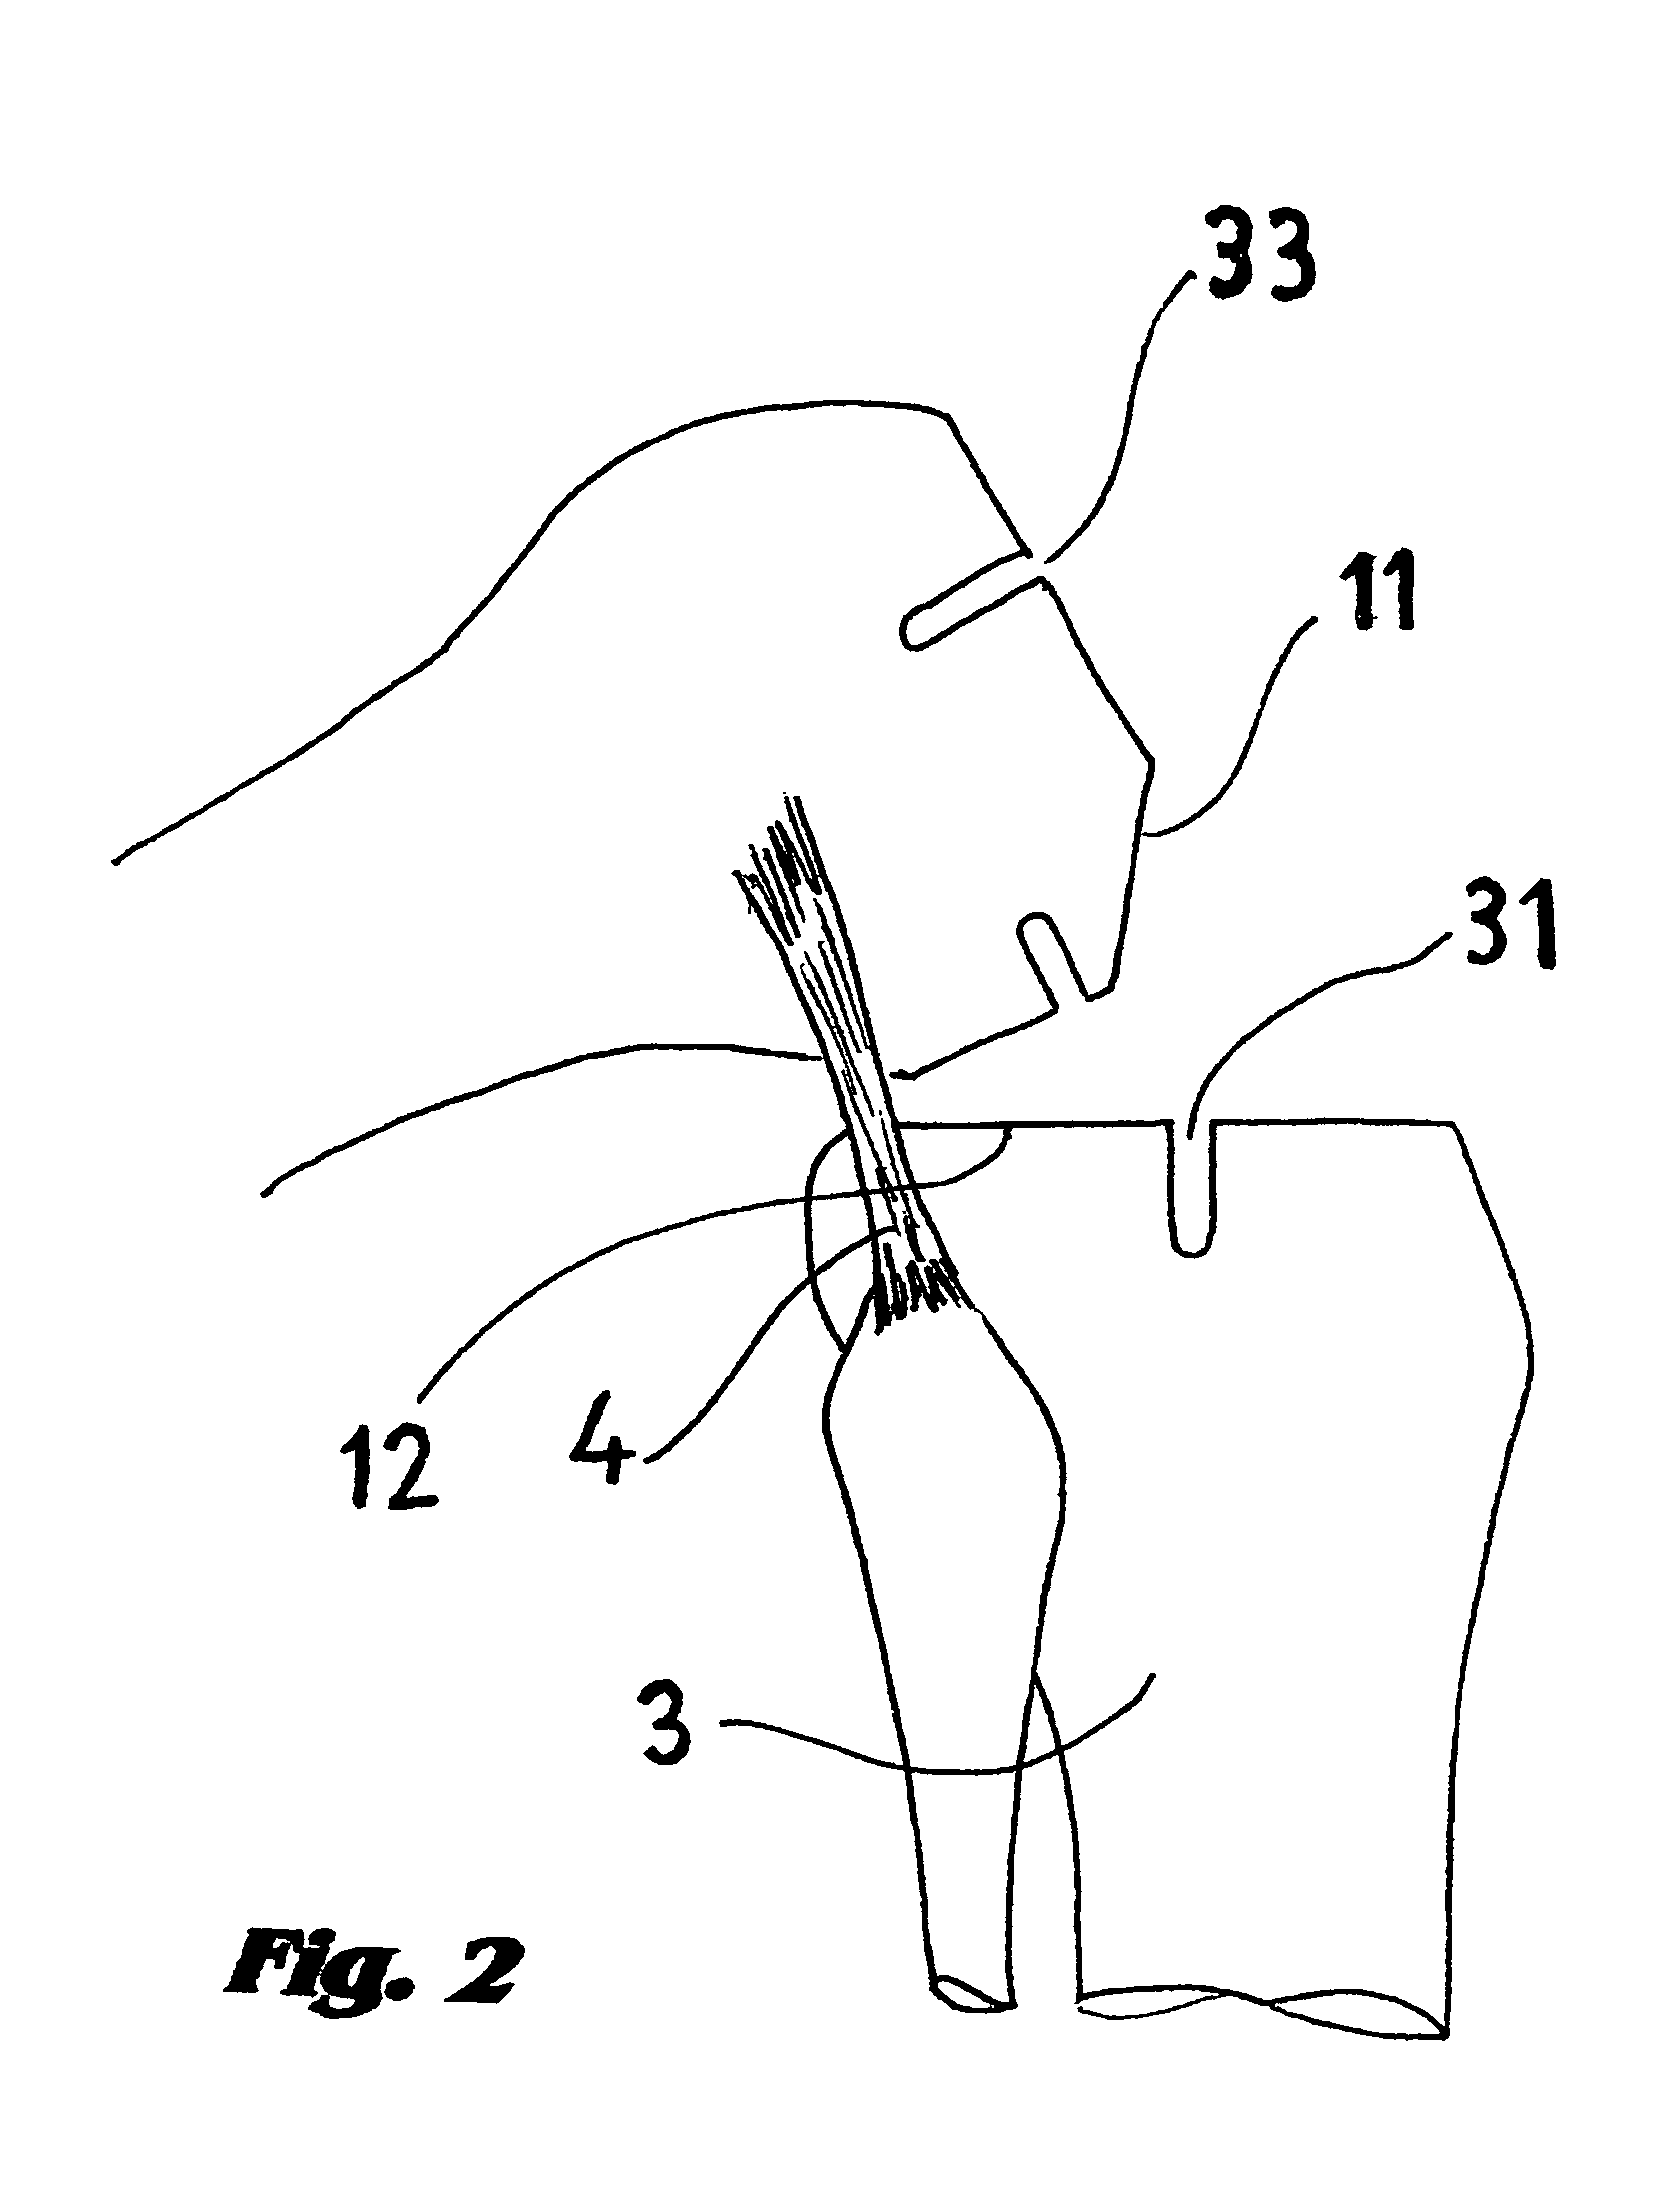 Bicondylar resurfacing prosthesis and method for insertion through direct lateral approach